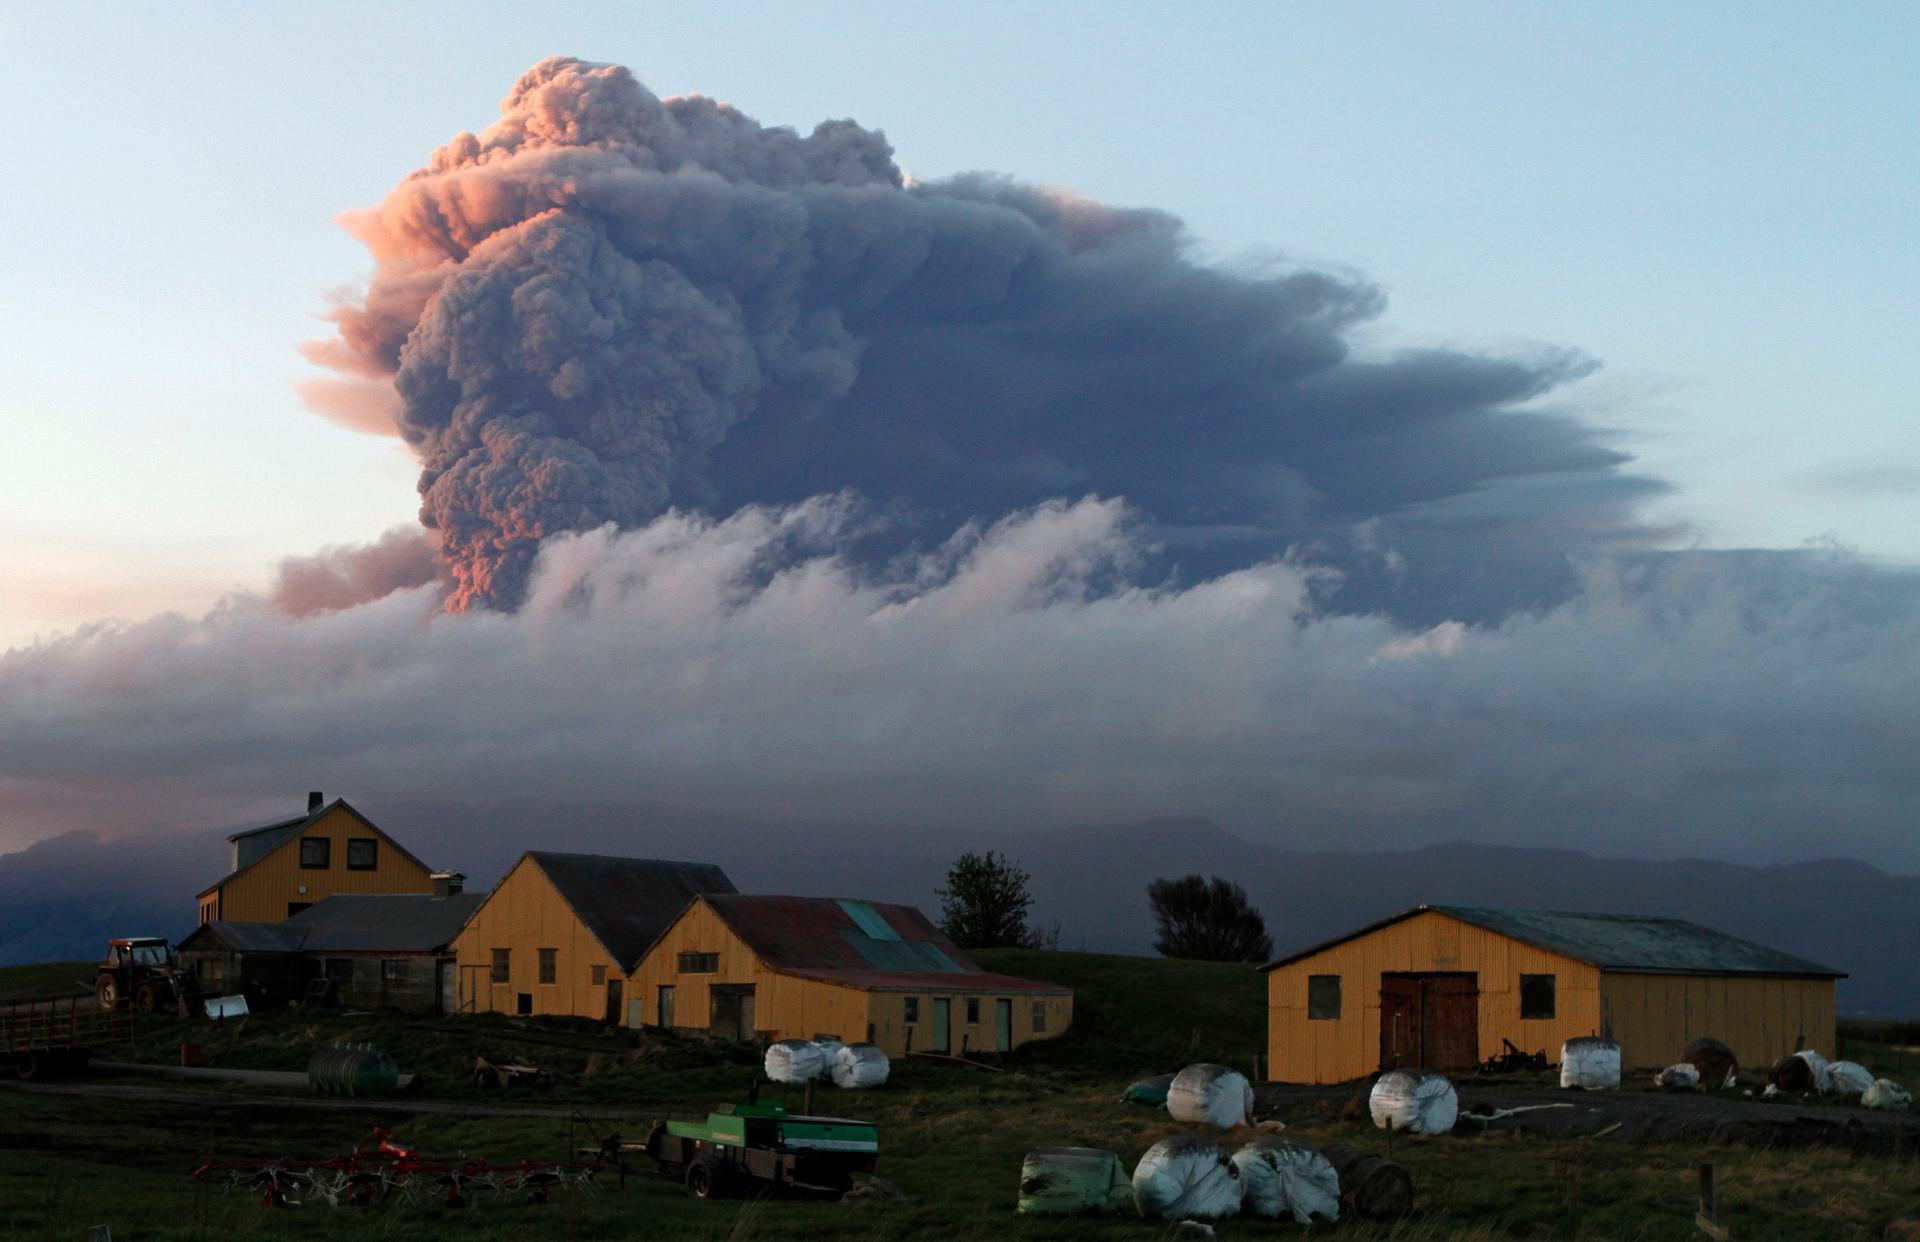 A fresh cloud of ash rises from the volcano under the Eyjafjallajökull glacier in Iceland on May 16, 2010.